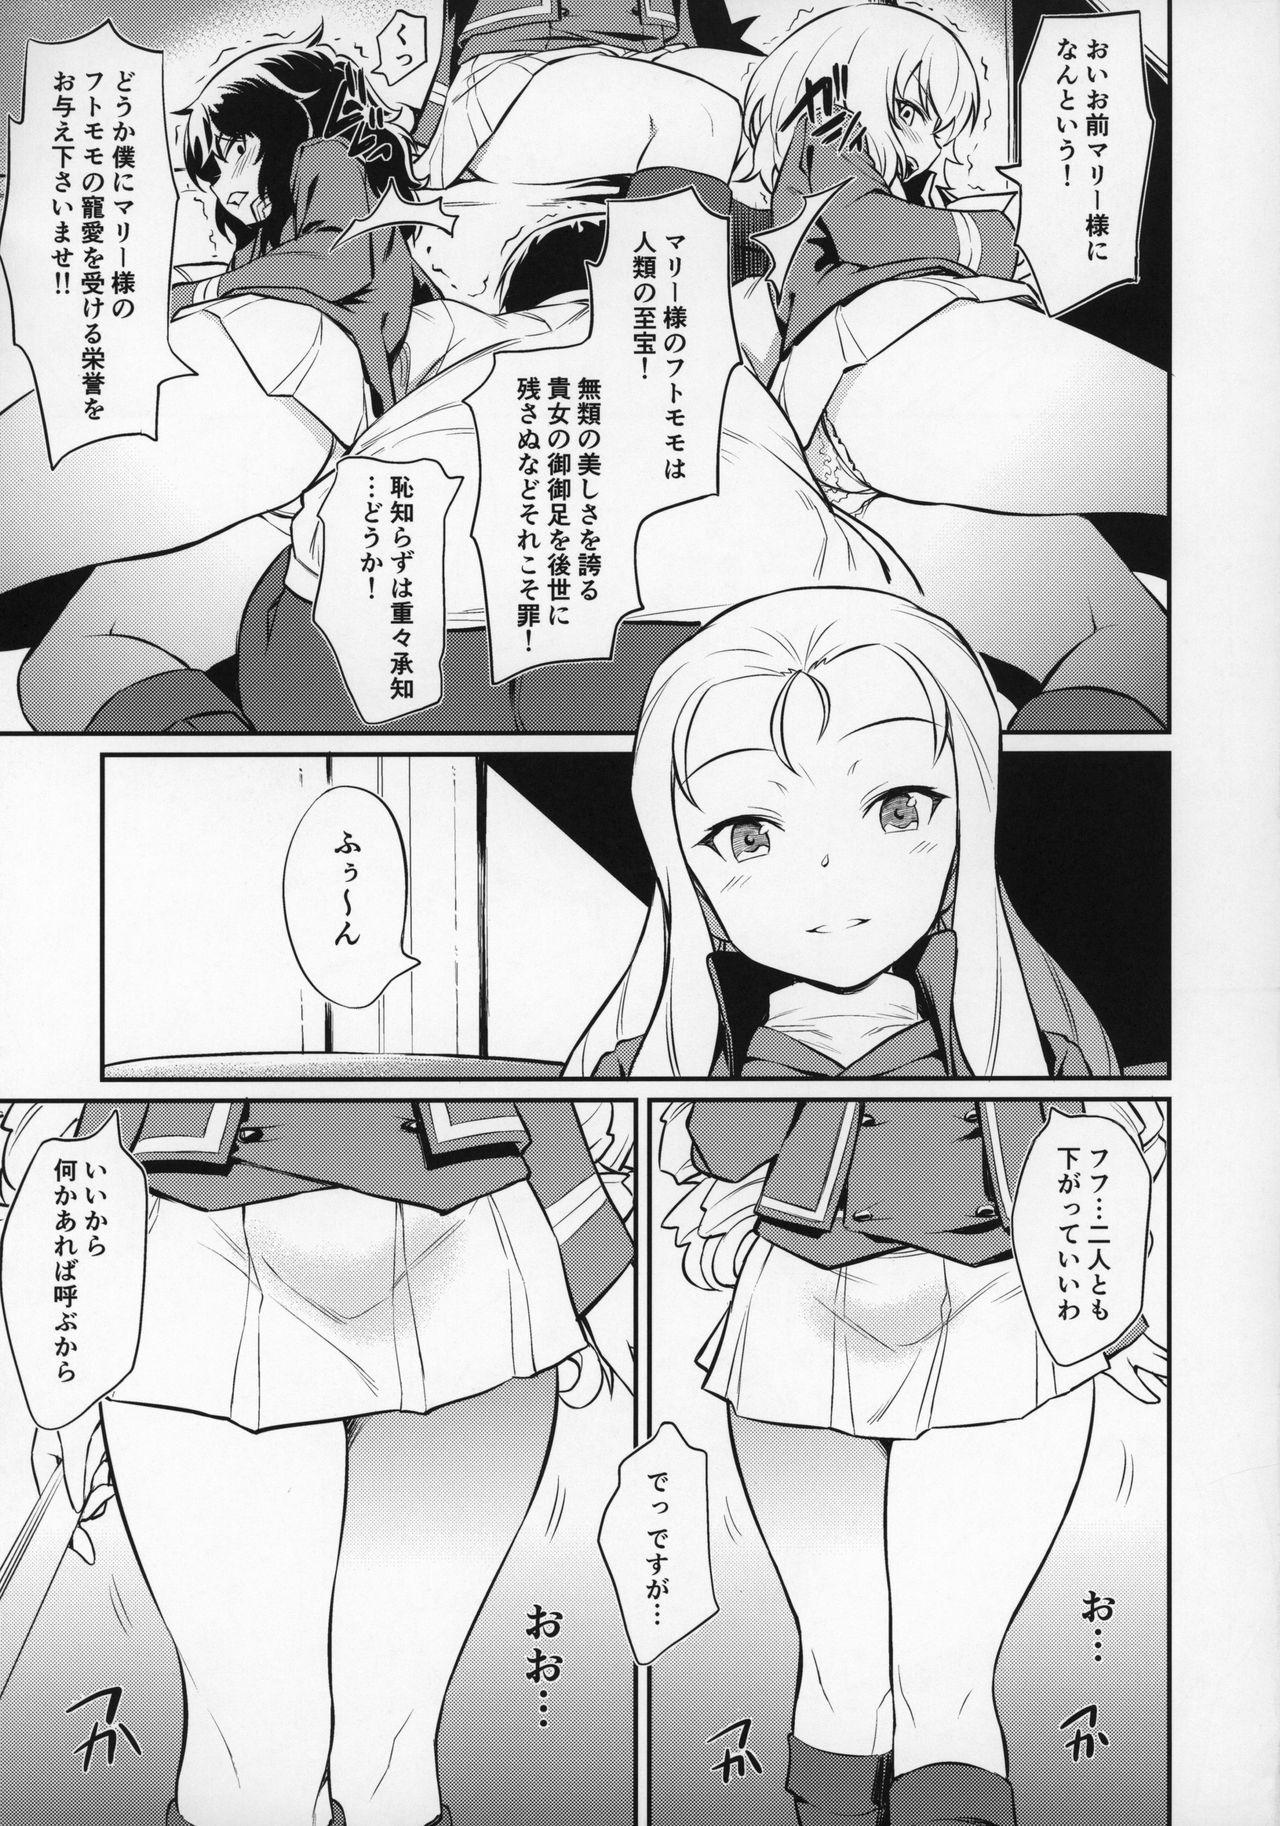 Female Domination Marie-sama no Sankakujime - Girls und panzer Old Vs Young - Page 6